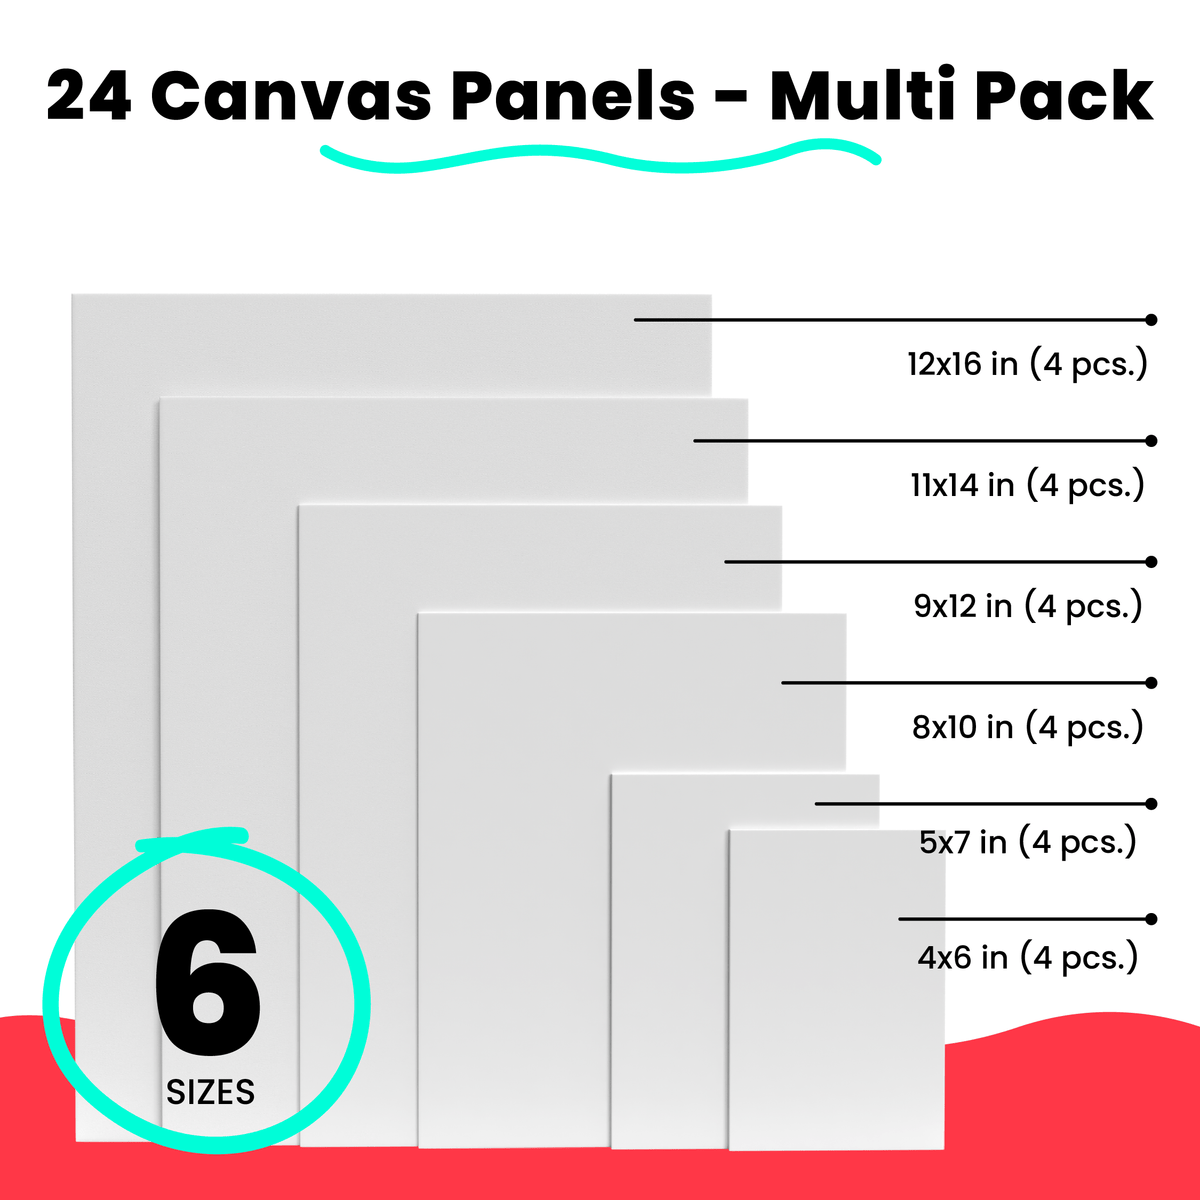 Painting Canvas Panels | 4x6, 5x7, 8x10, 9x12, 11x14, 12x16 inch (4 Each, 24 Pack) 